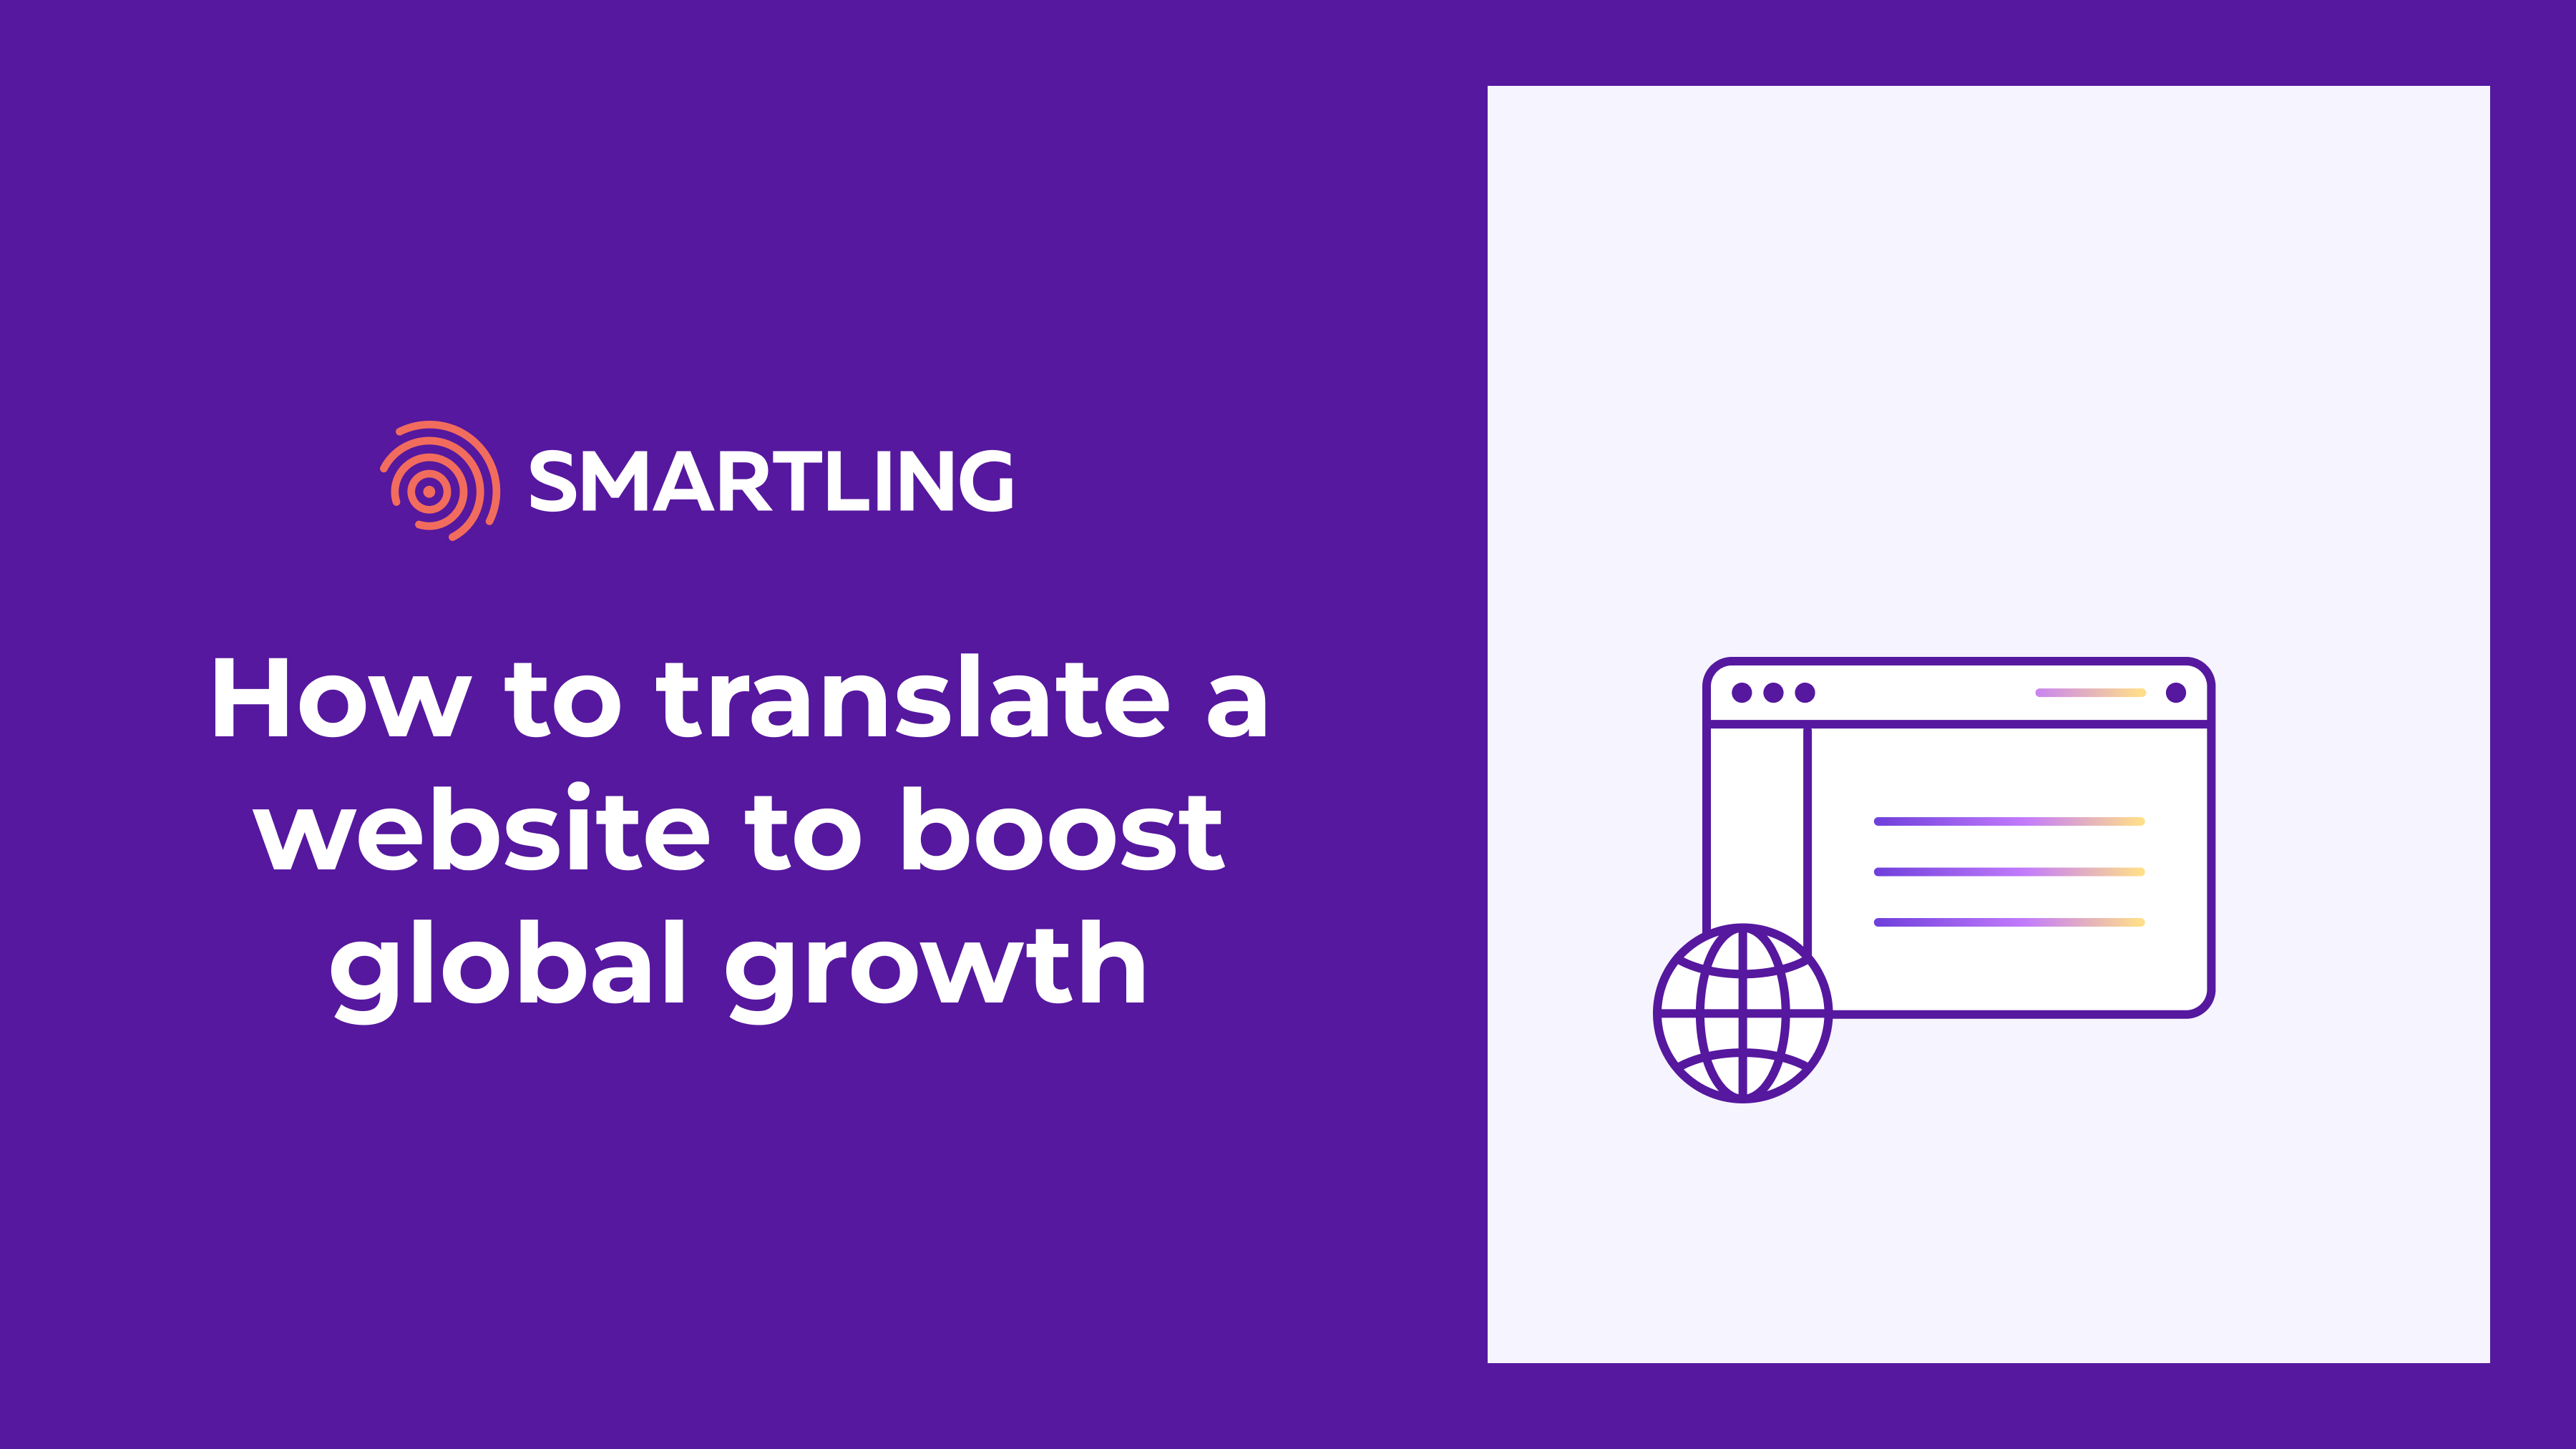 Learn how to translate a website for global growth with our comprehensive guide that includes strategies for quick, effective translation and localization.
